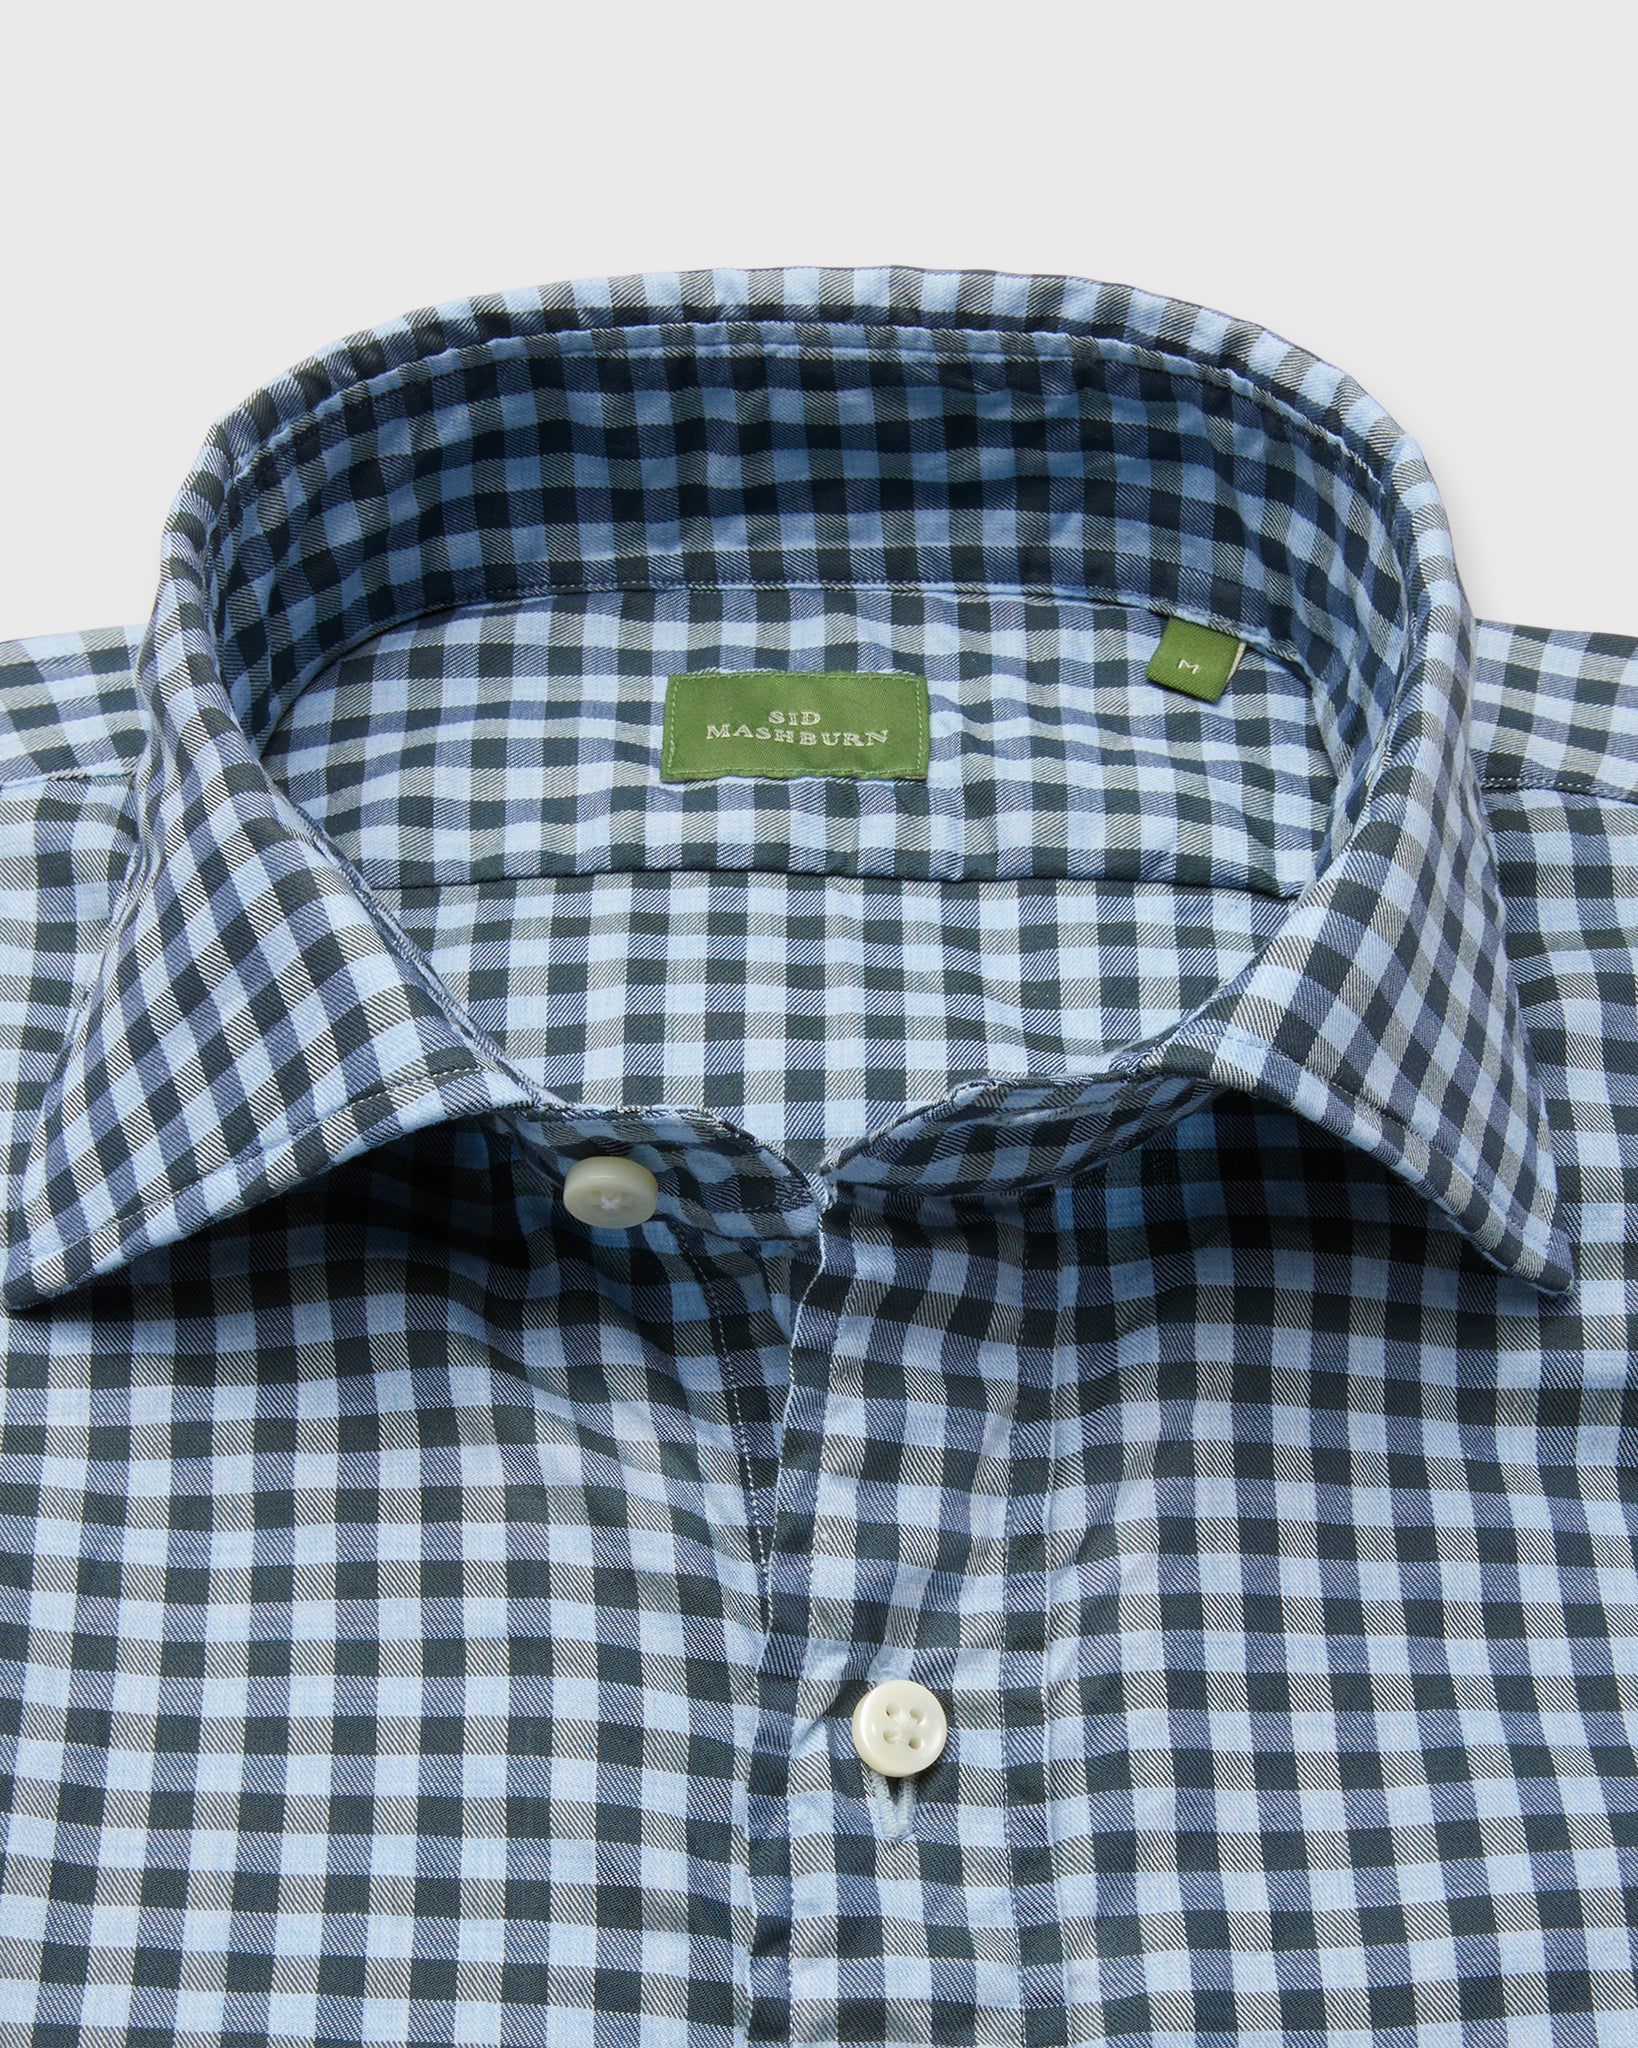 Spread Collar Sport Shirt in Olive/Sky Gingham Twill